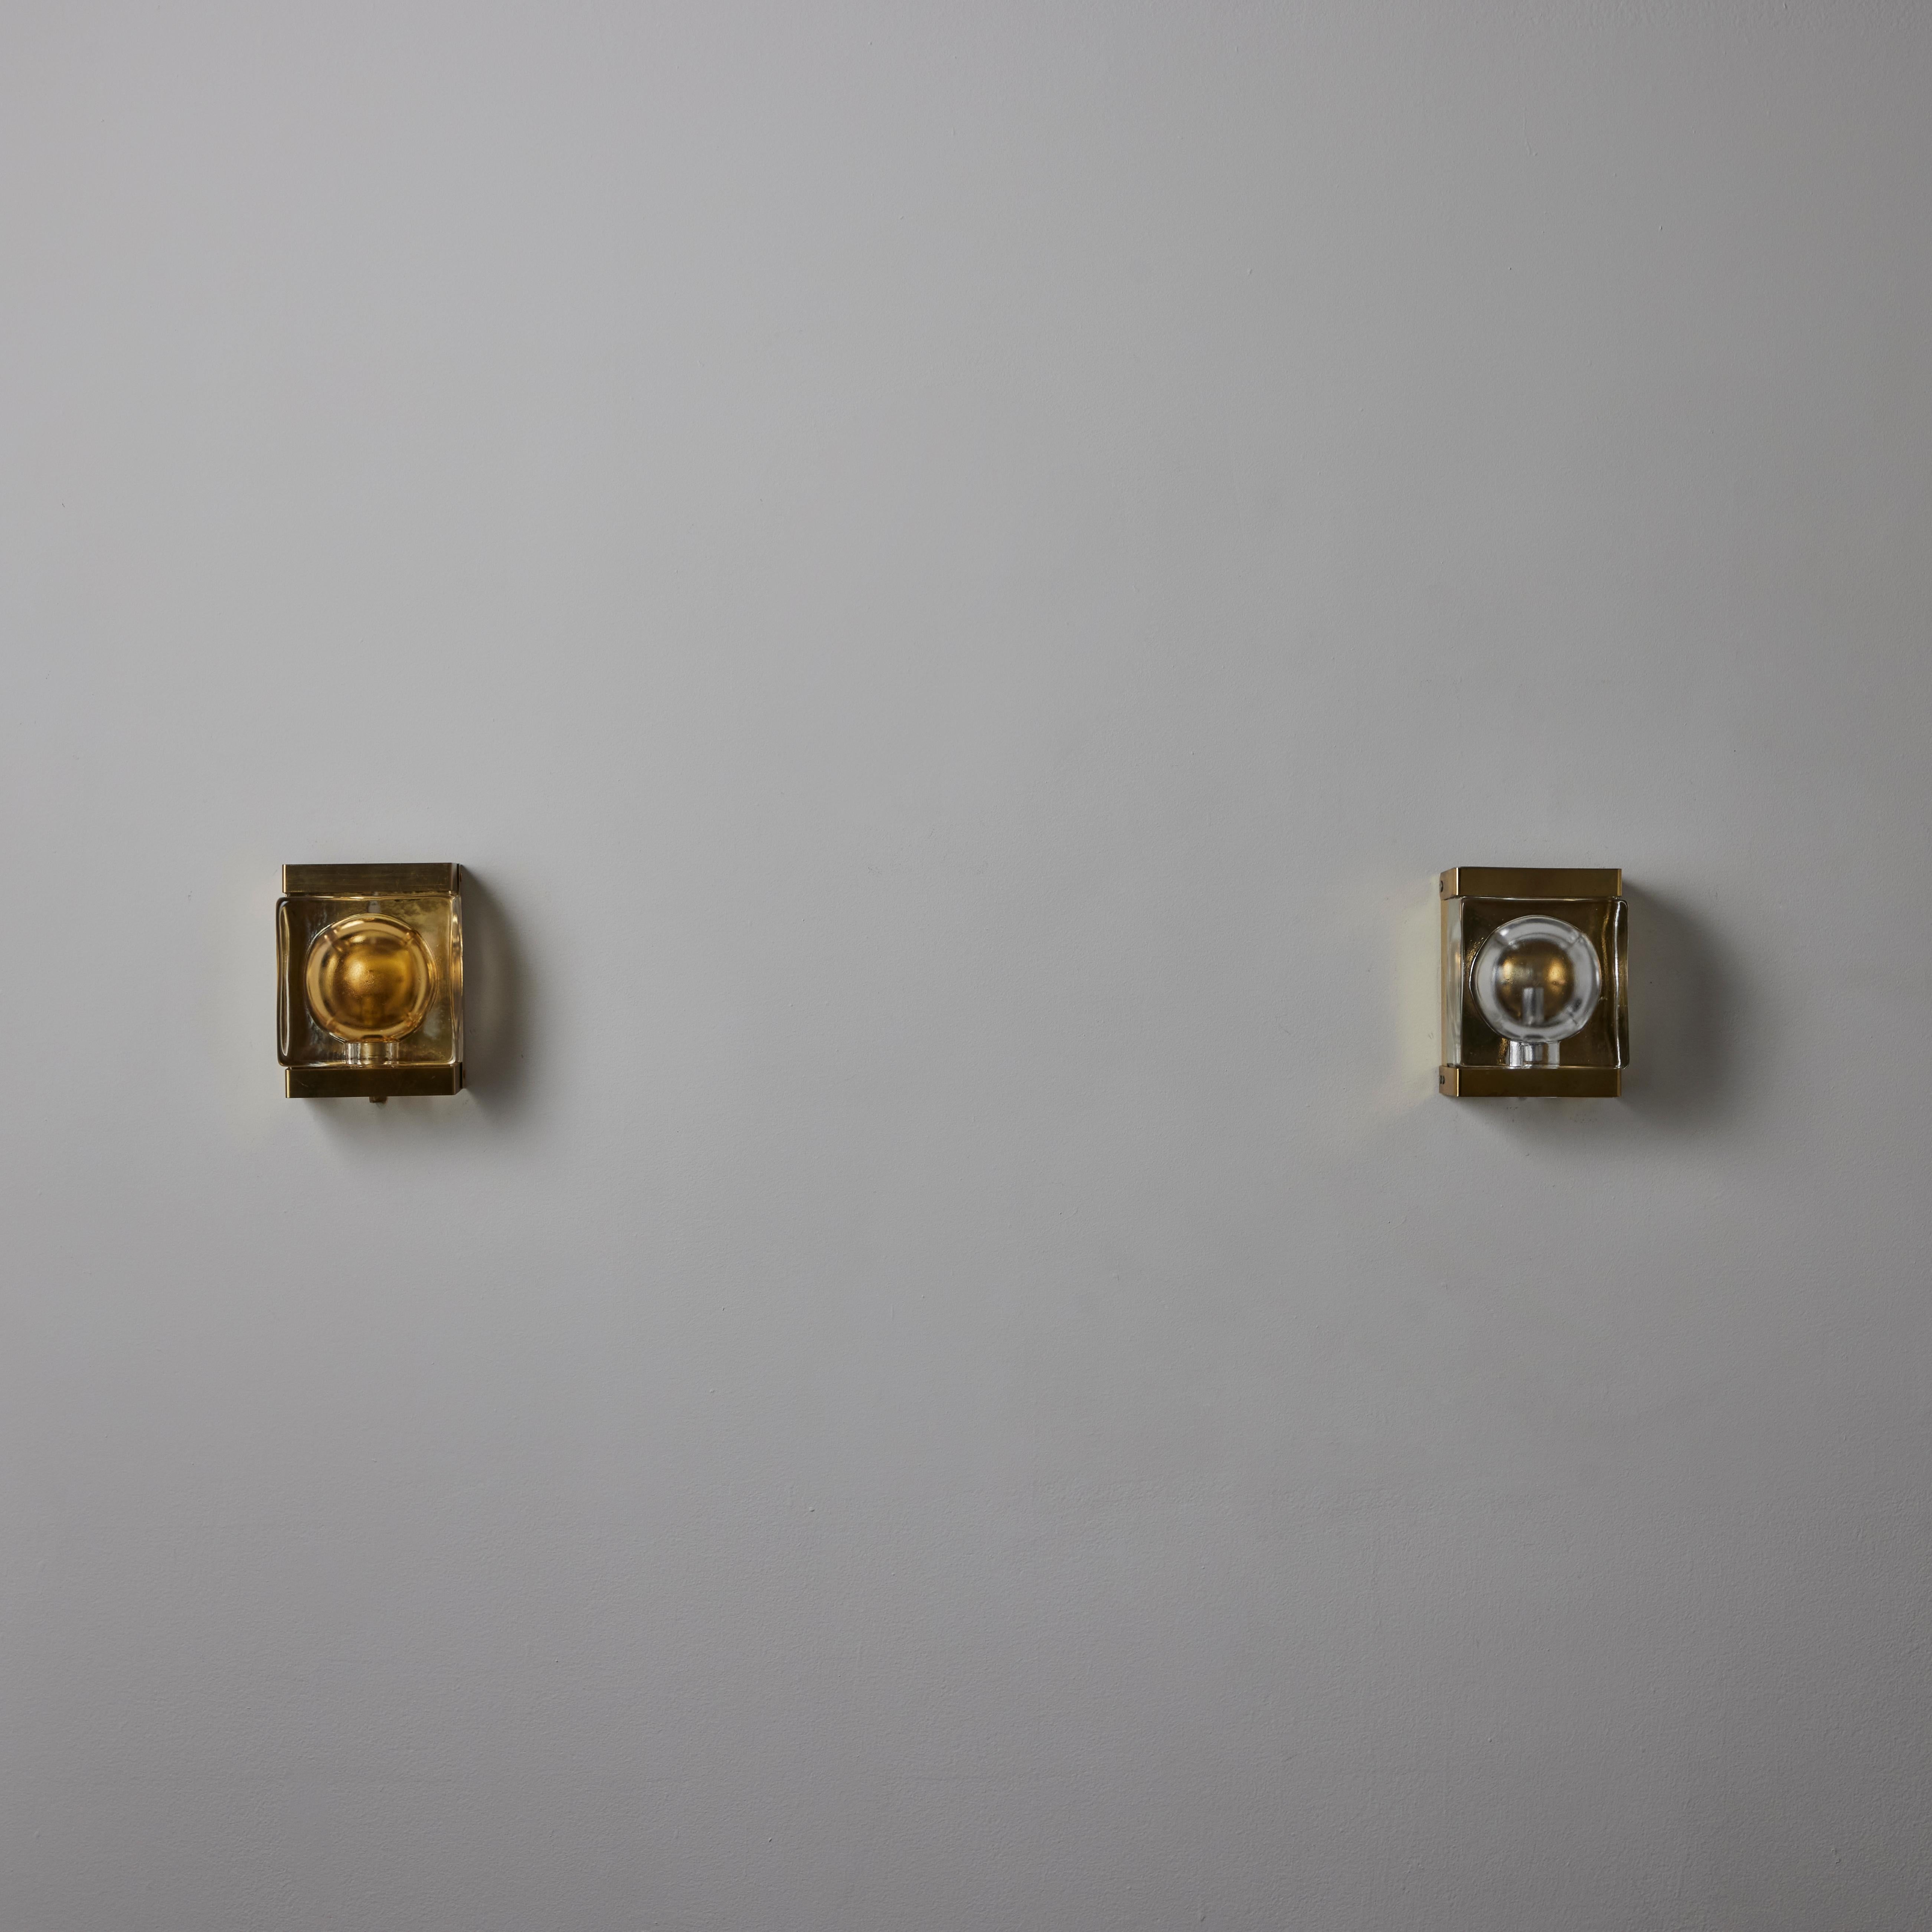 Model 15806 Sconces by Vitrika. Designed and manufactured in Denmark, circa 1960s. Brass and molded glass. Wired for US junction boxes. Maintains original manufacturer's label. Each sconce takes an E14 40W maximum bulb. Sold individually.

Please